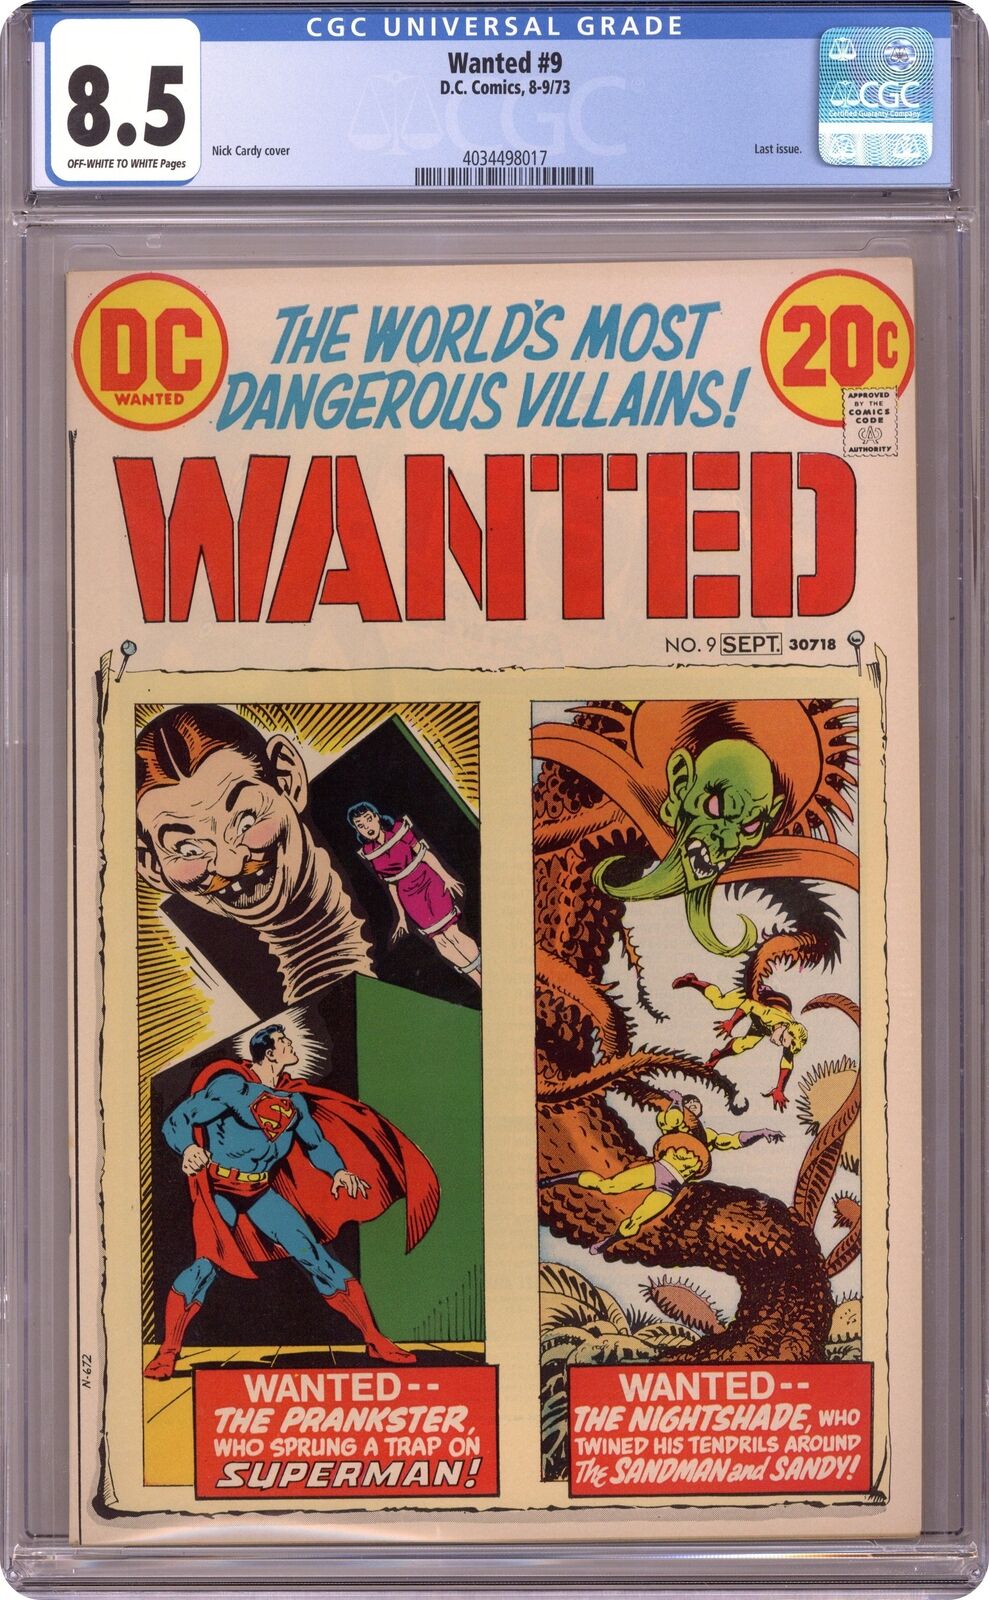 Wanted the World's Most Dangerous Villains #9 CGC 8.5 1973 4034498017